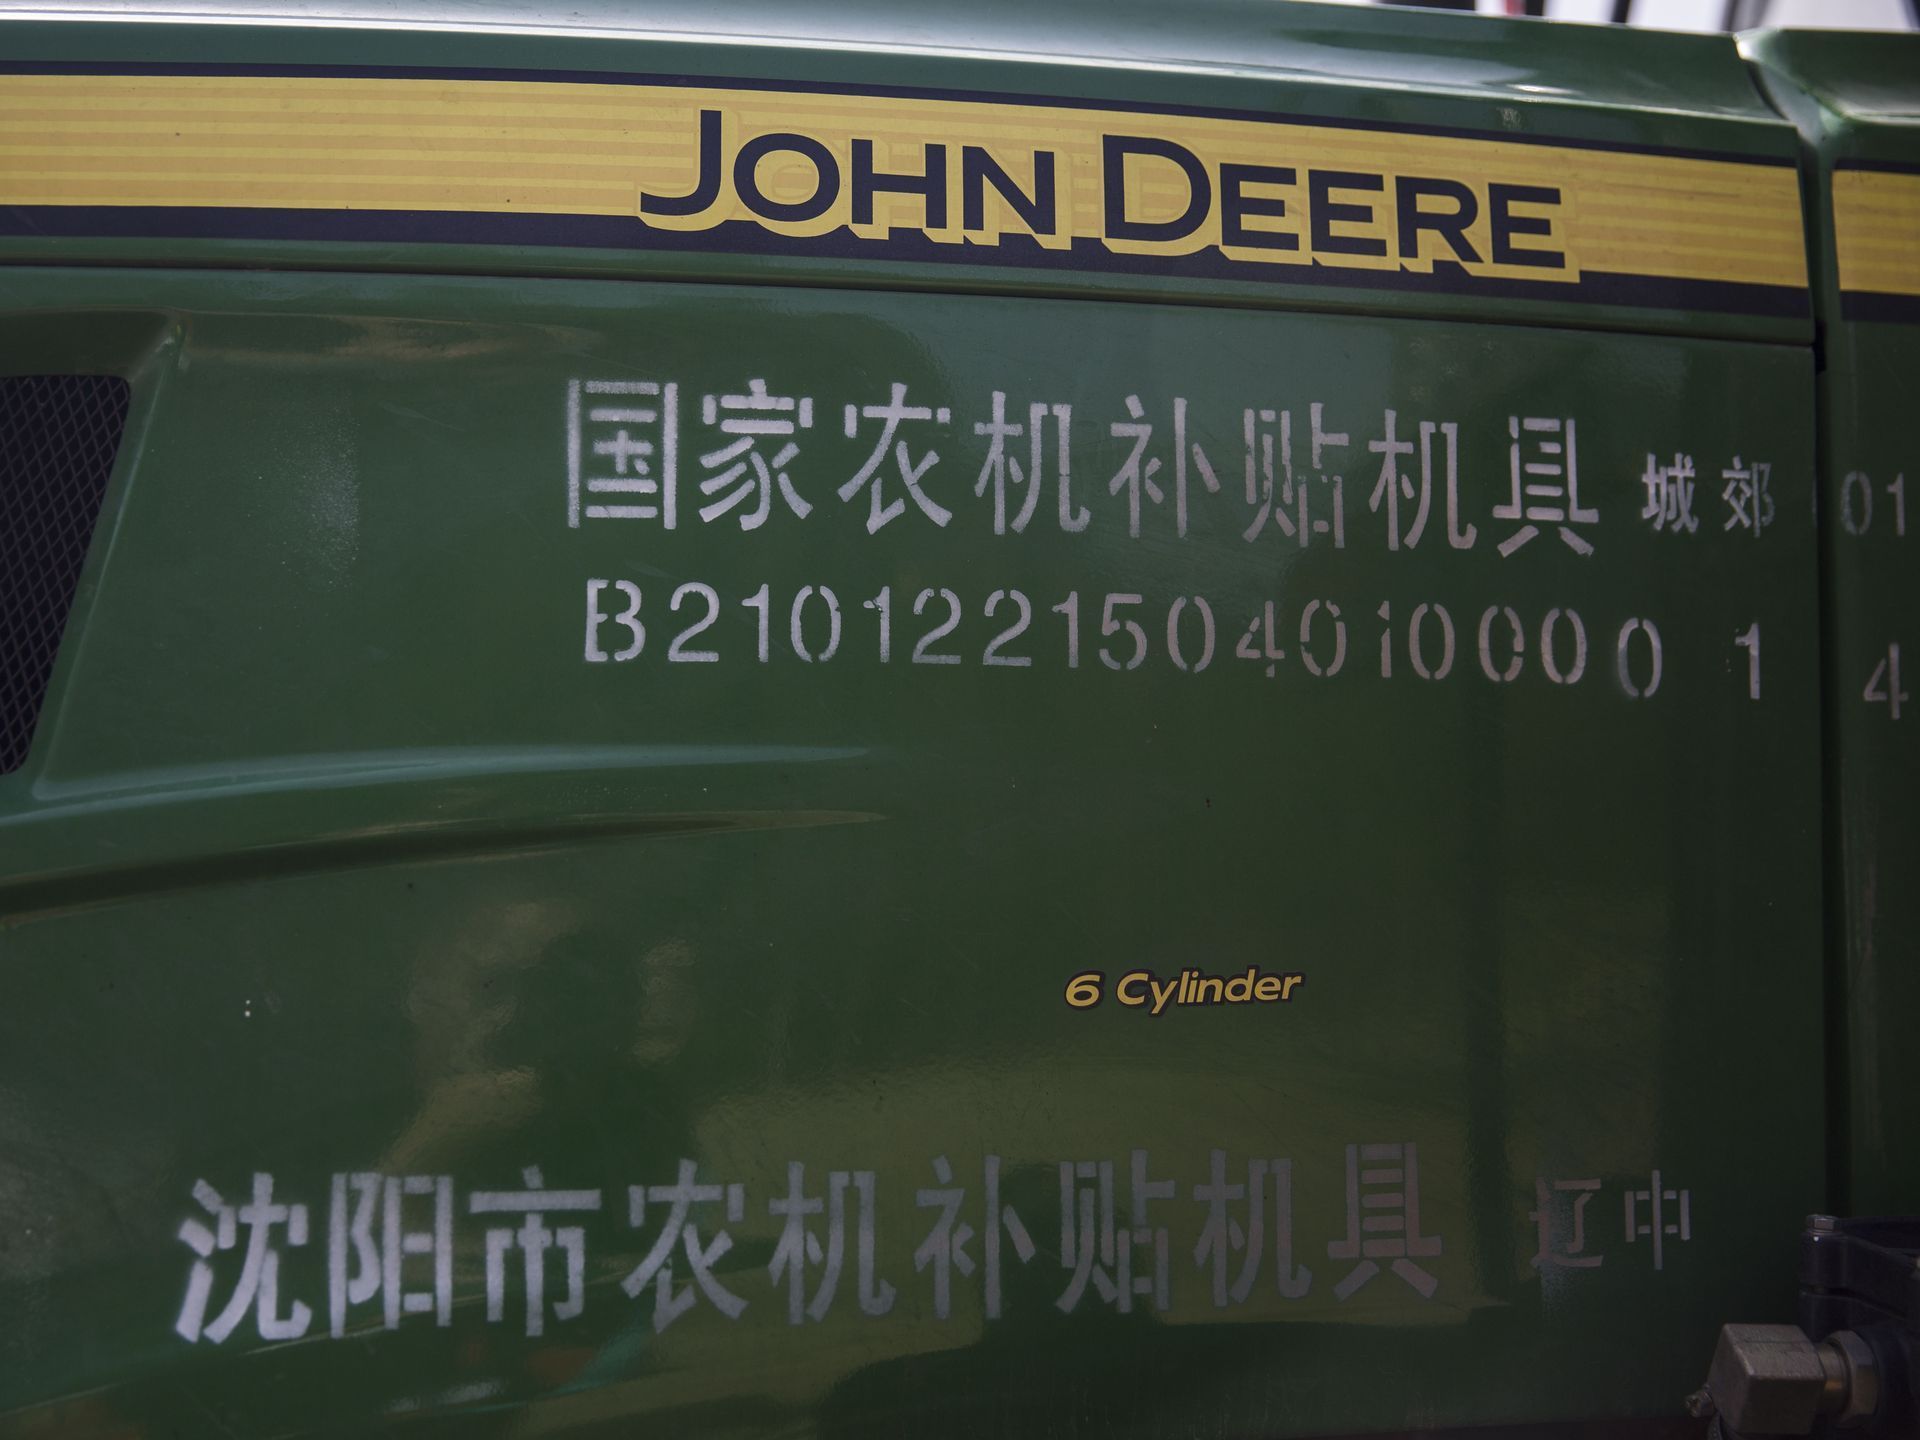 Mandarin characters accompany the English John Deere logo on a tractor set up for display during the groundbreaking of the China-U.S. Demonstration Farm on Saturday, Sept. 23, 2017, in Luanping County, Hebei, China. Image by Kelsey Kremer.